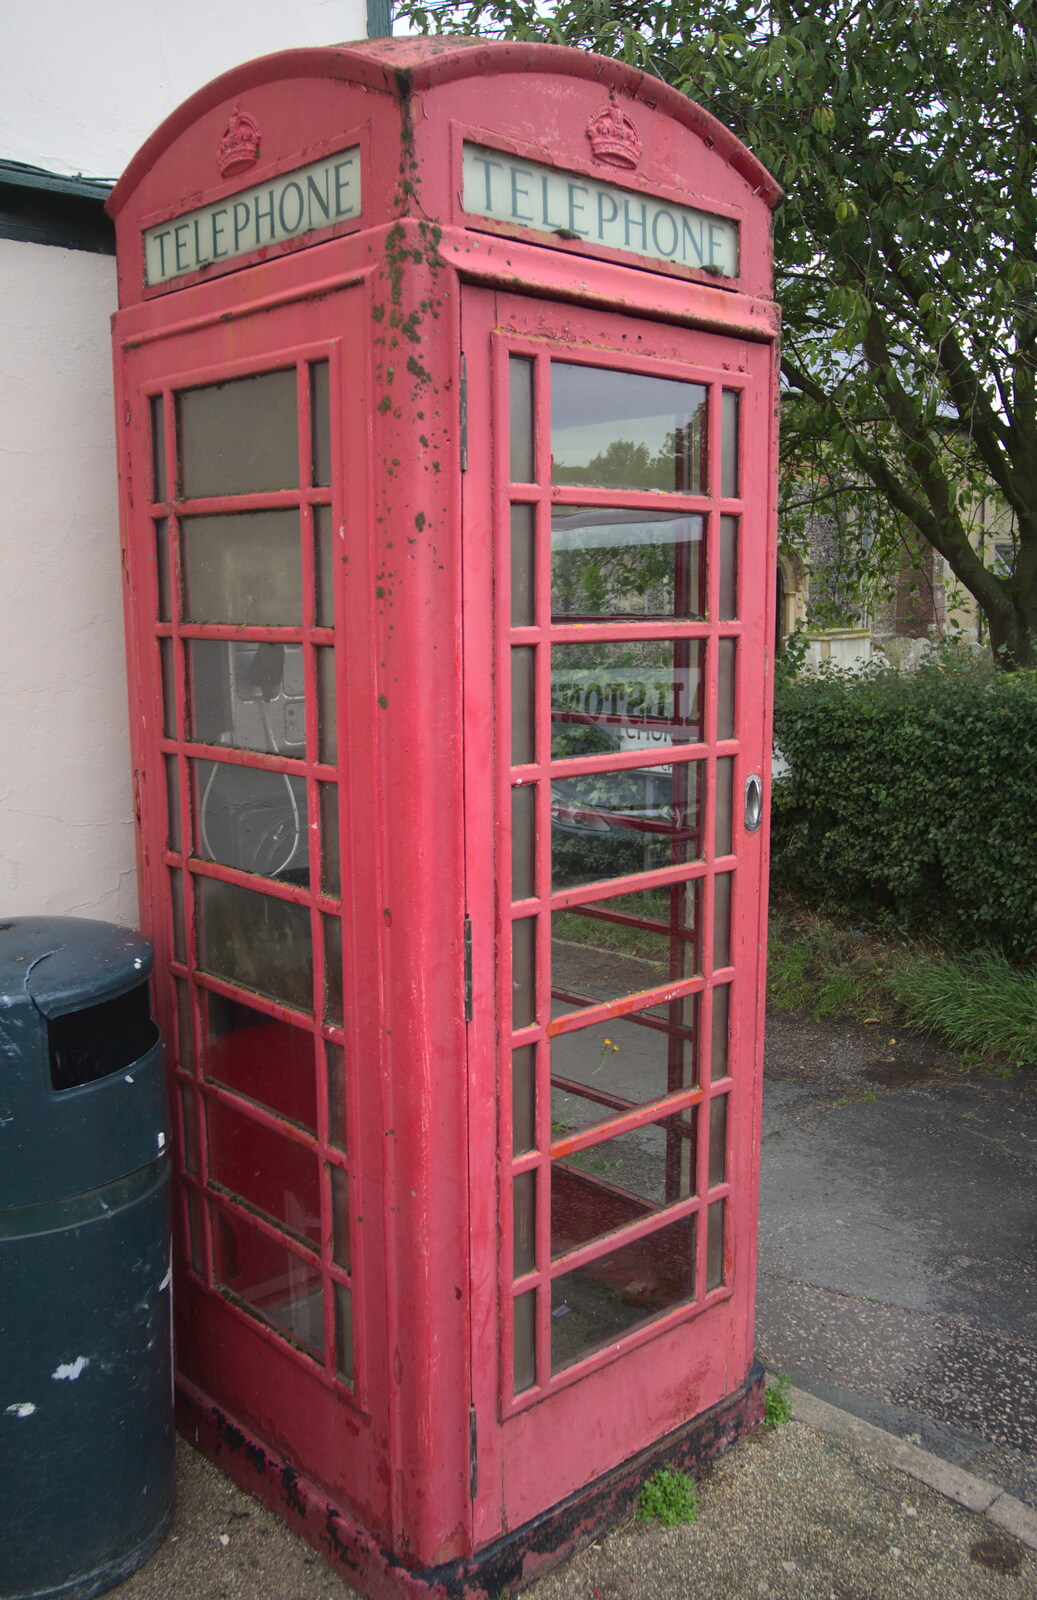 A faded K6 phone box in Laxfield from The Low House Beer Festival, Laxfield, Suffolk - 15th September 2013